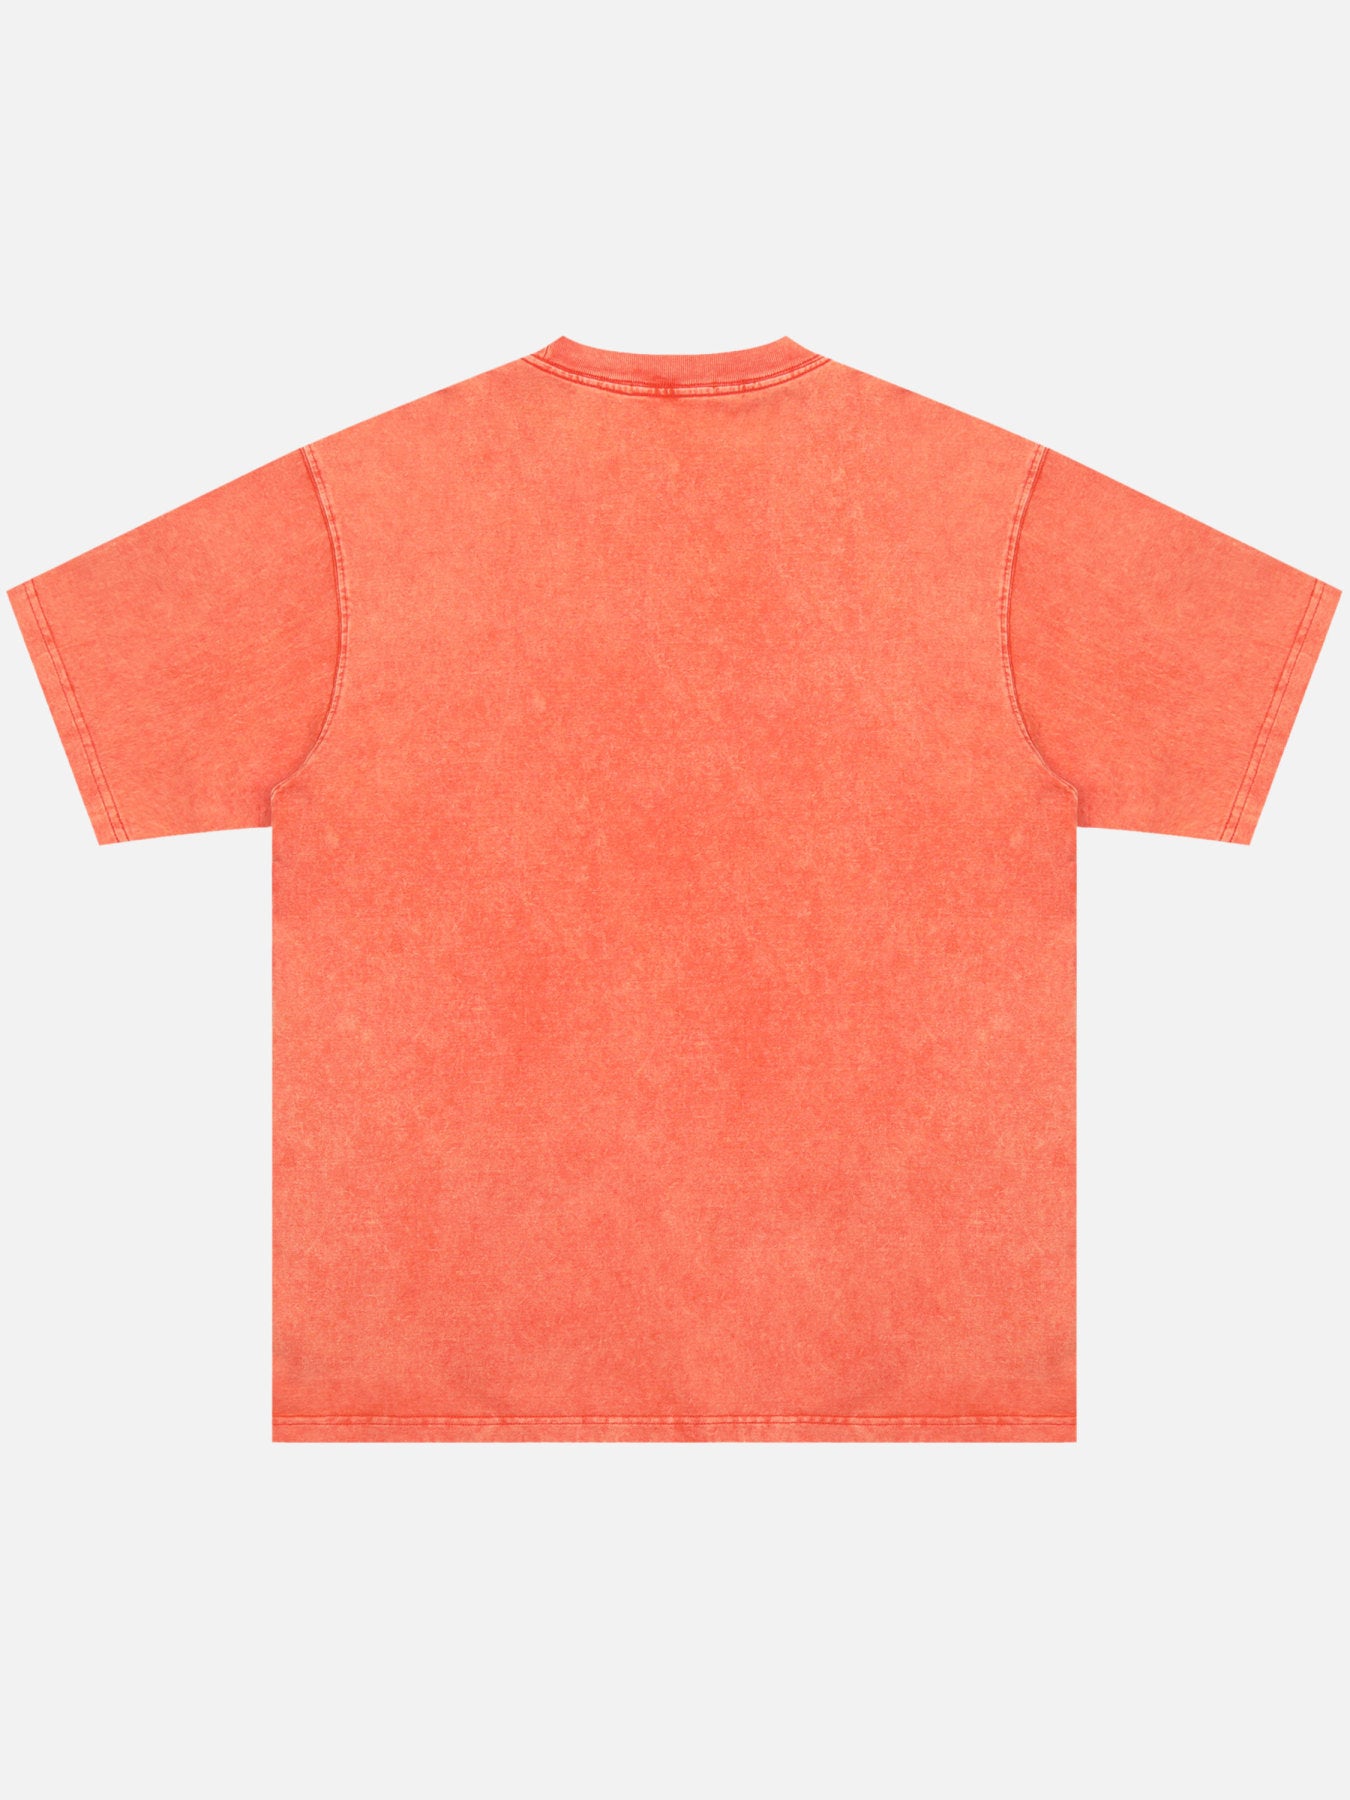 The Supermade Square Textured Letters Printed T-shirt